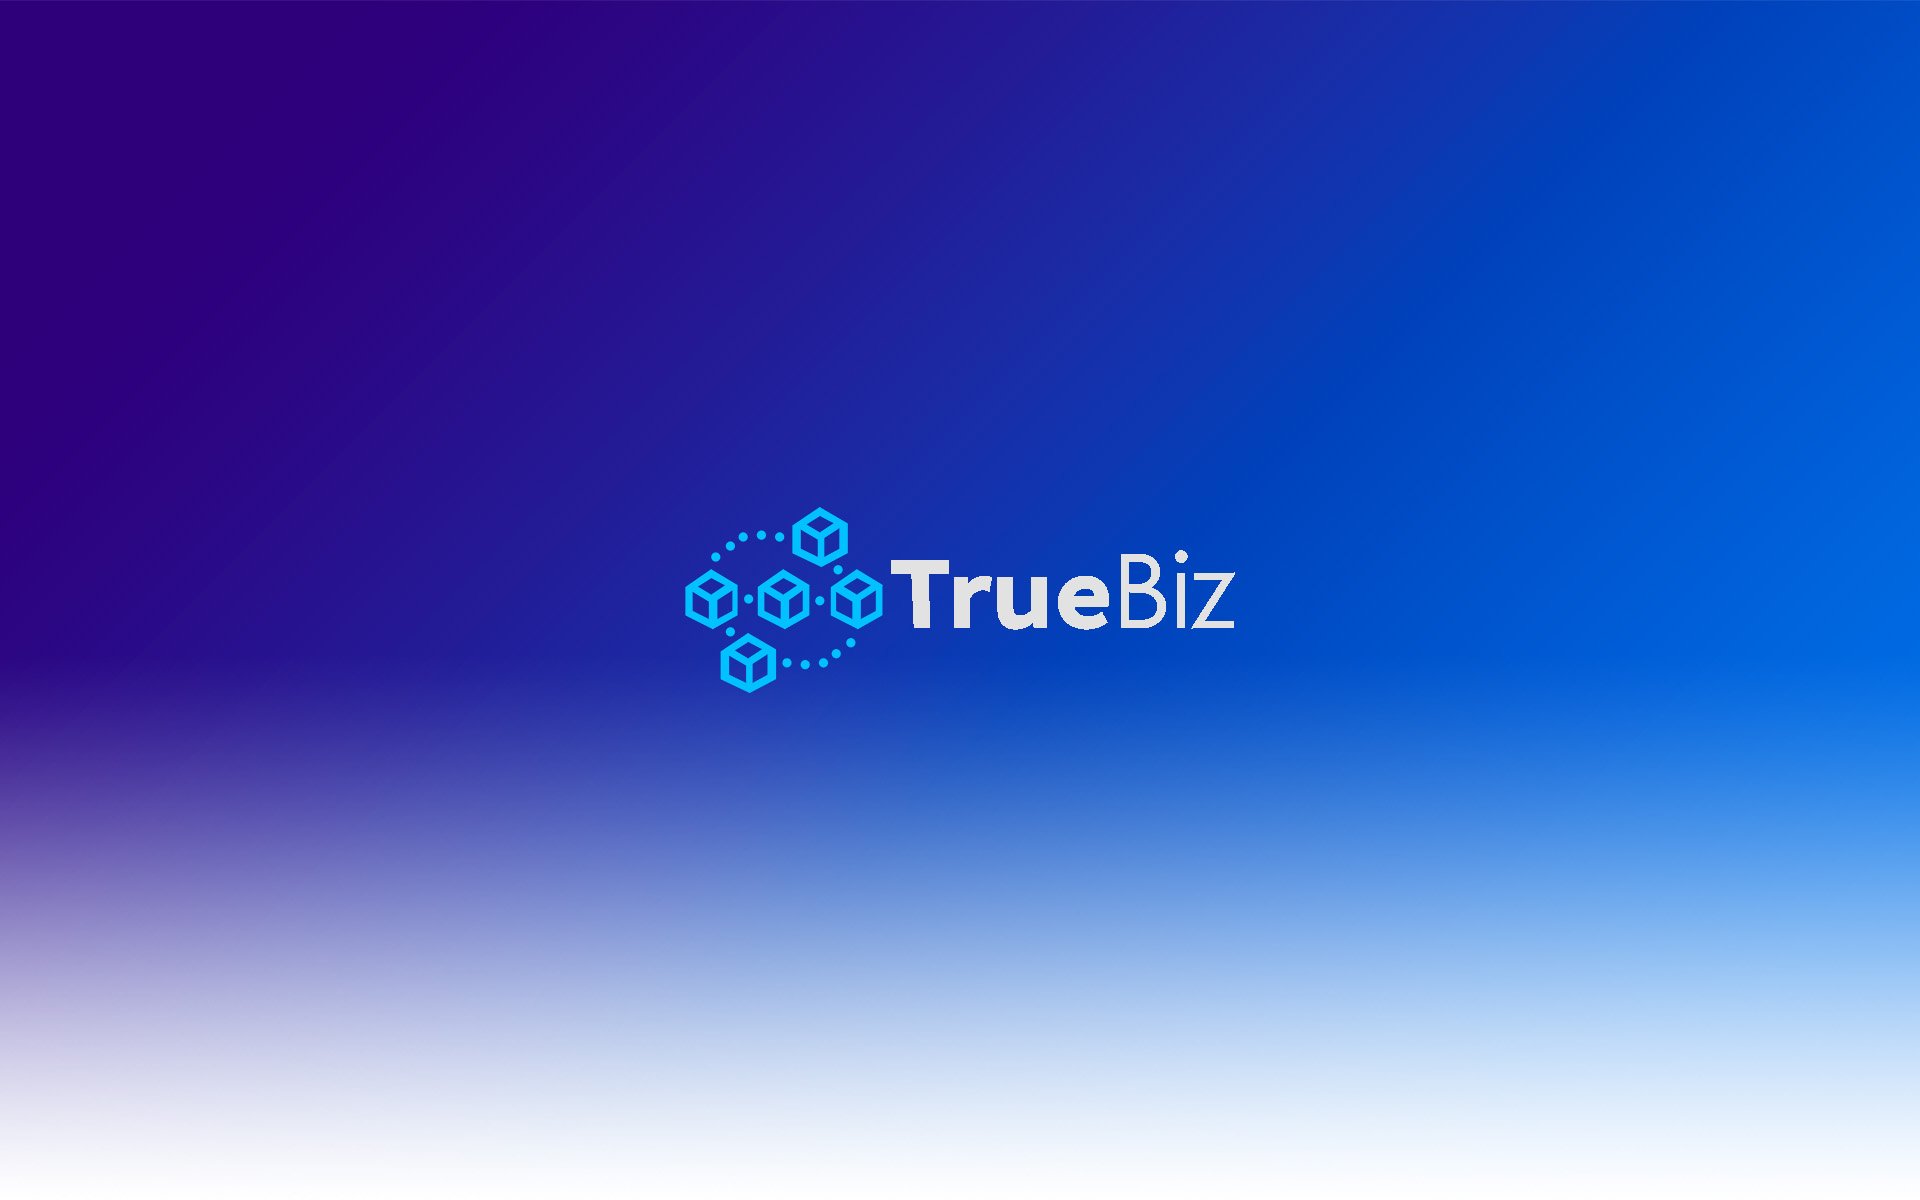 TrueBiz.io Prepares To Launch ICO That Will Bridge The Gap Between Real Businesses & The Blockchain By Seamlessly Converting Crypto To Fiat